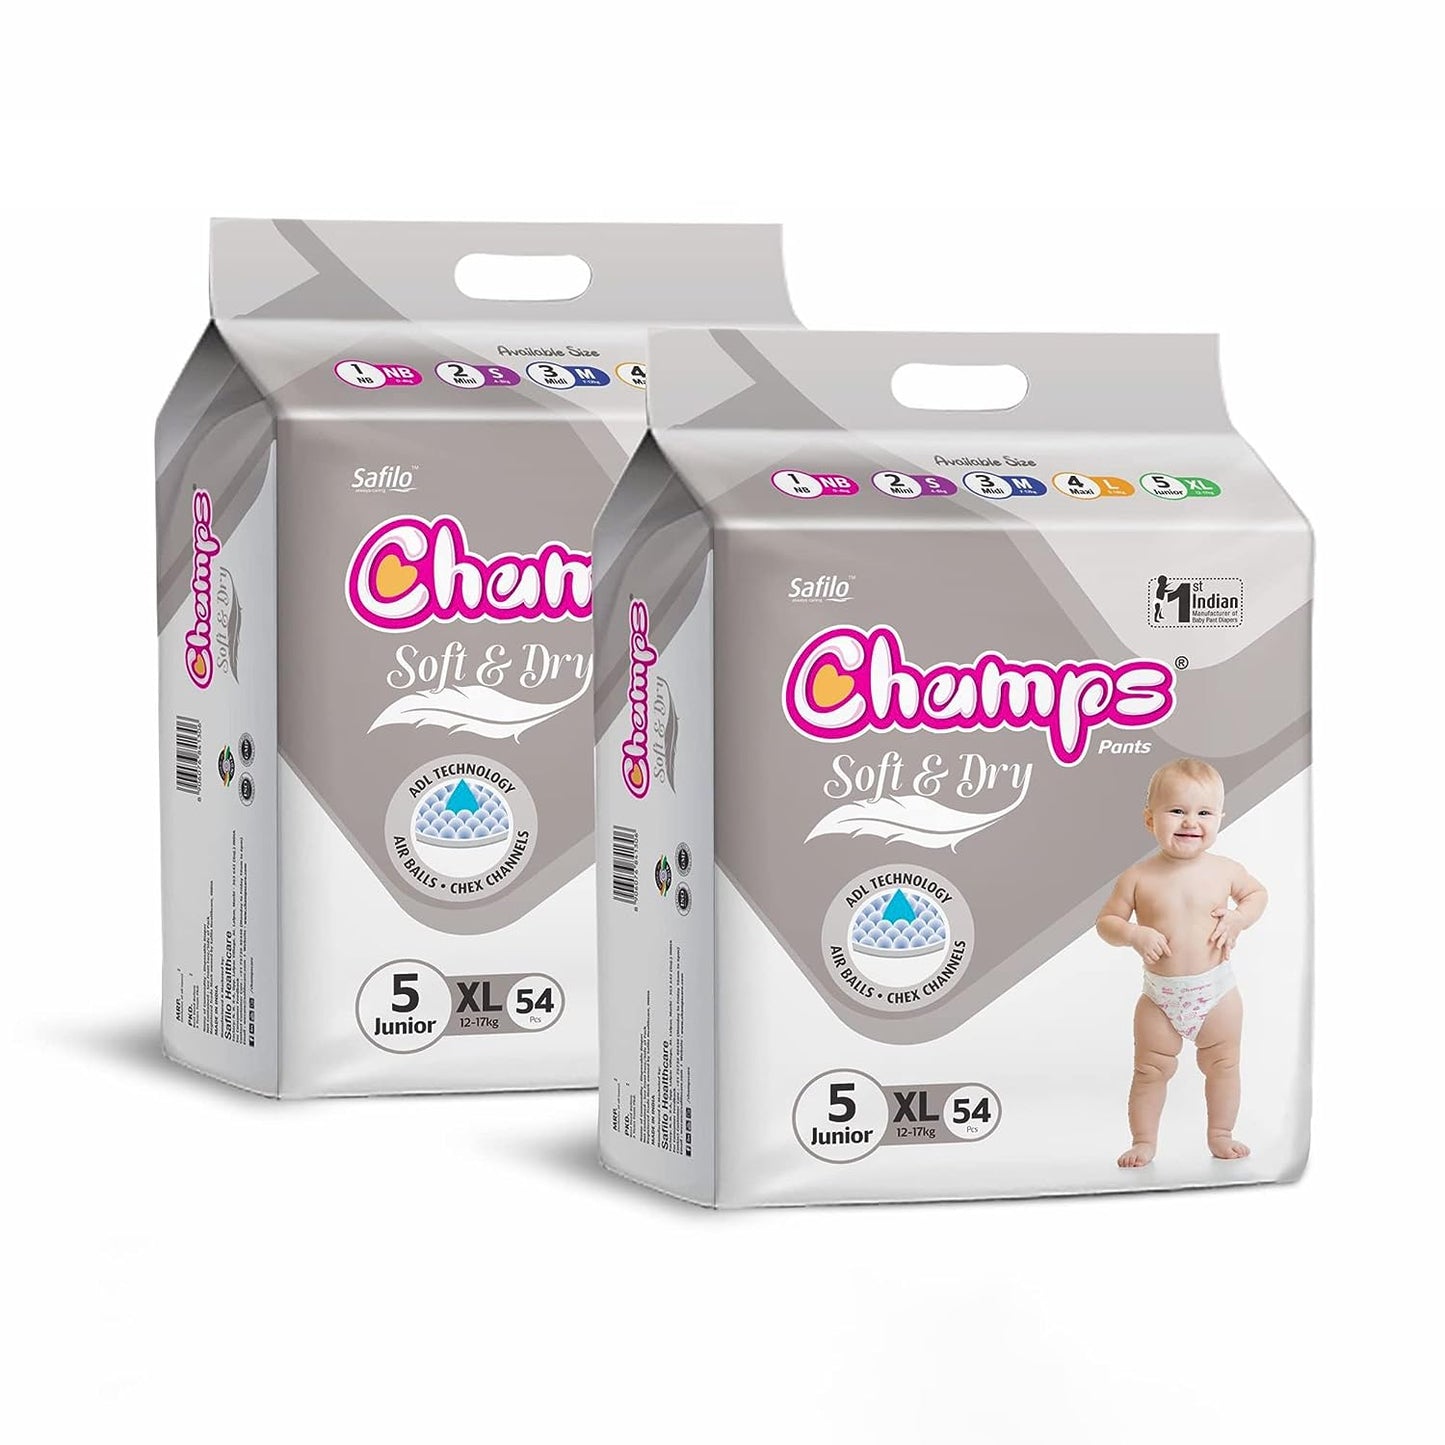 0961 Baby Diaper High Absorbent Pant Diapers,  Champs Soft and Dry Baby Diaper Pants Xl  54 Pcs (Extra Large , XL54 Pieces)